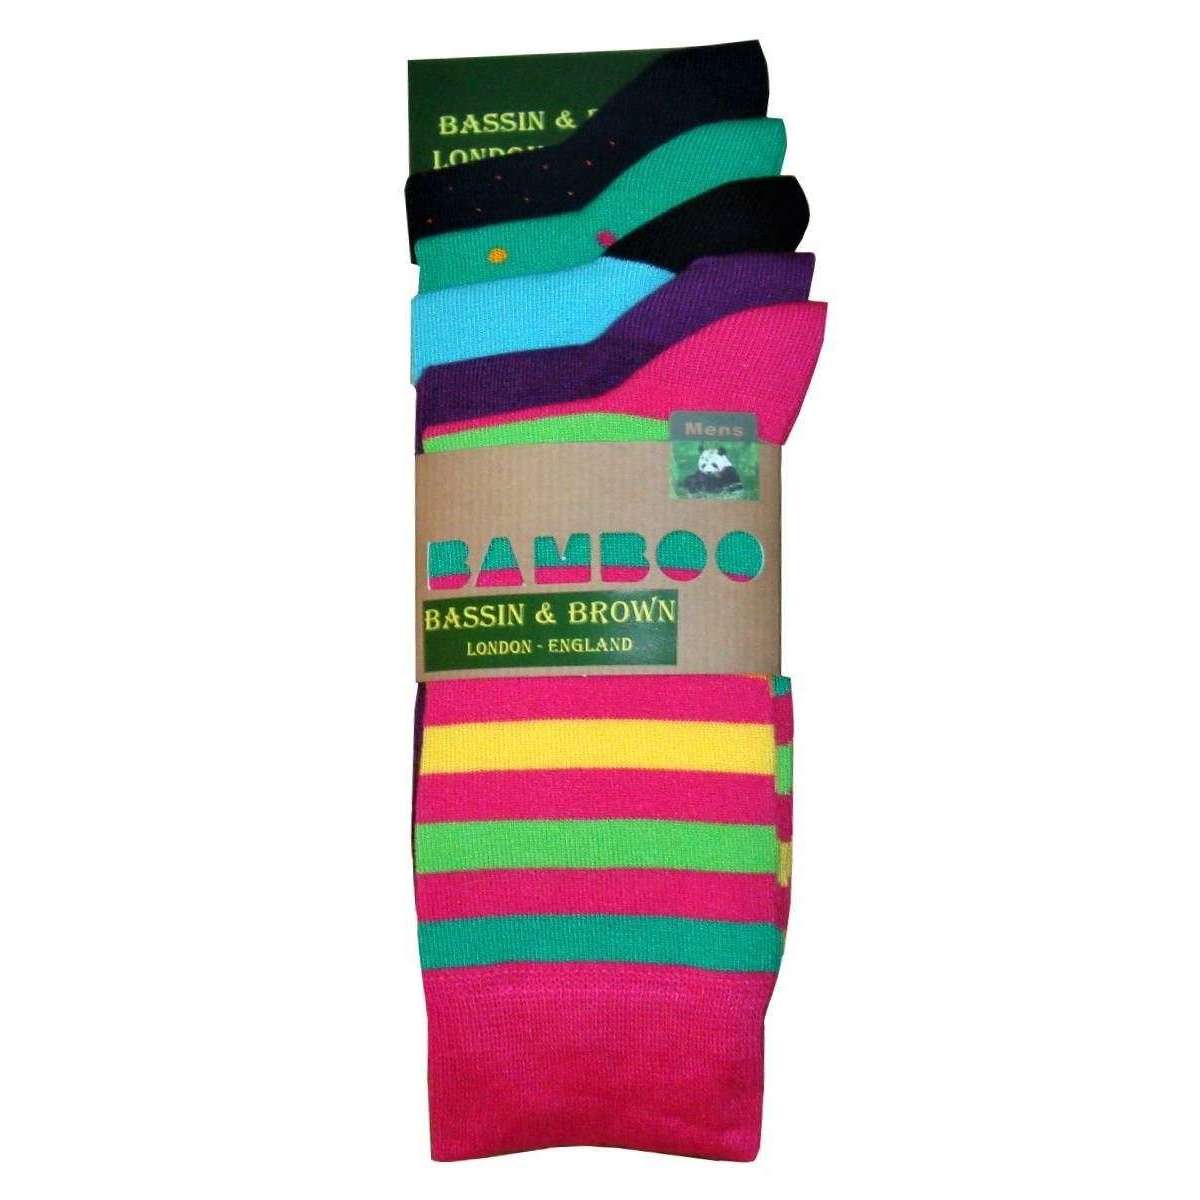 Bassin and Brown 5 Pack Assorted Bamboo Socks - Multi-colour